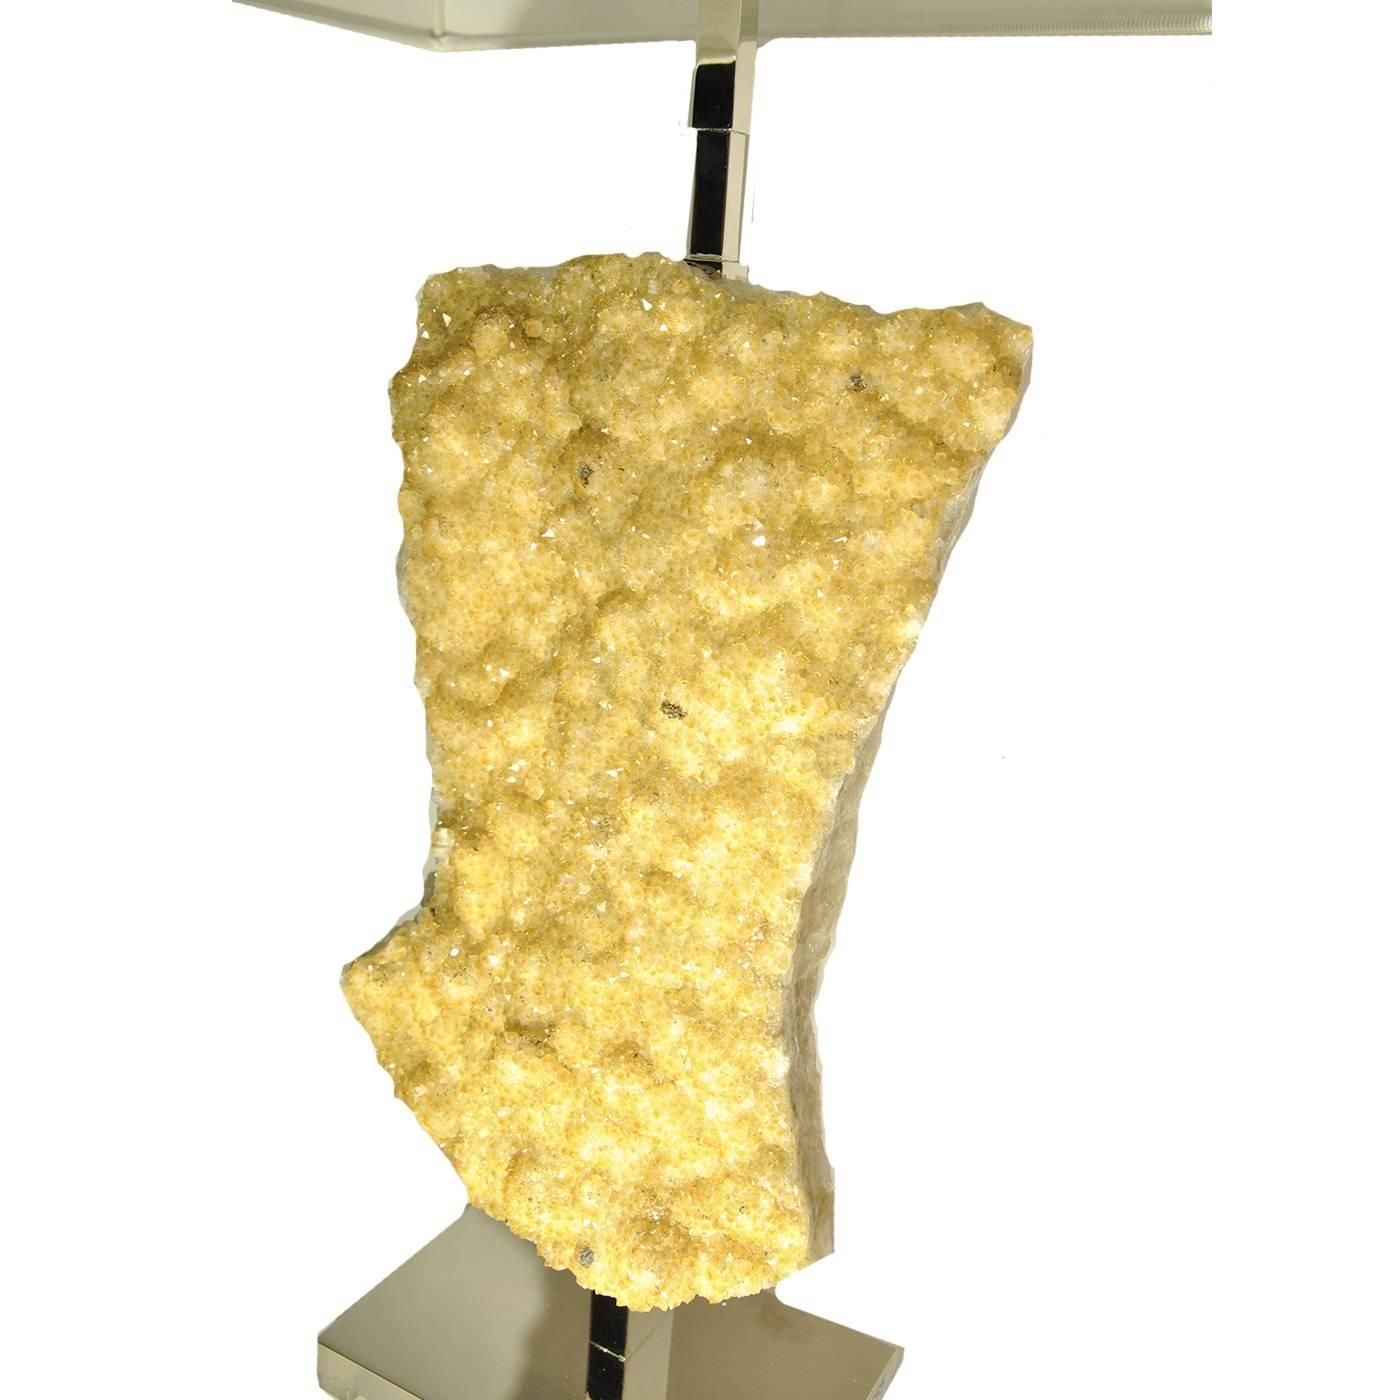 This table lamp doubles both as a functional home accessory and as a decorative sculptural piece that will enhance the decor of any room in the house. The body of this lamp was crafted using a large piece of hand-cut thermo diffuse citrine from